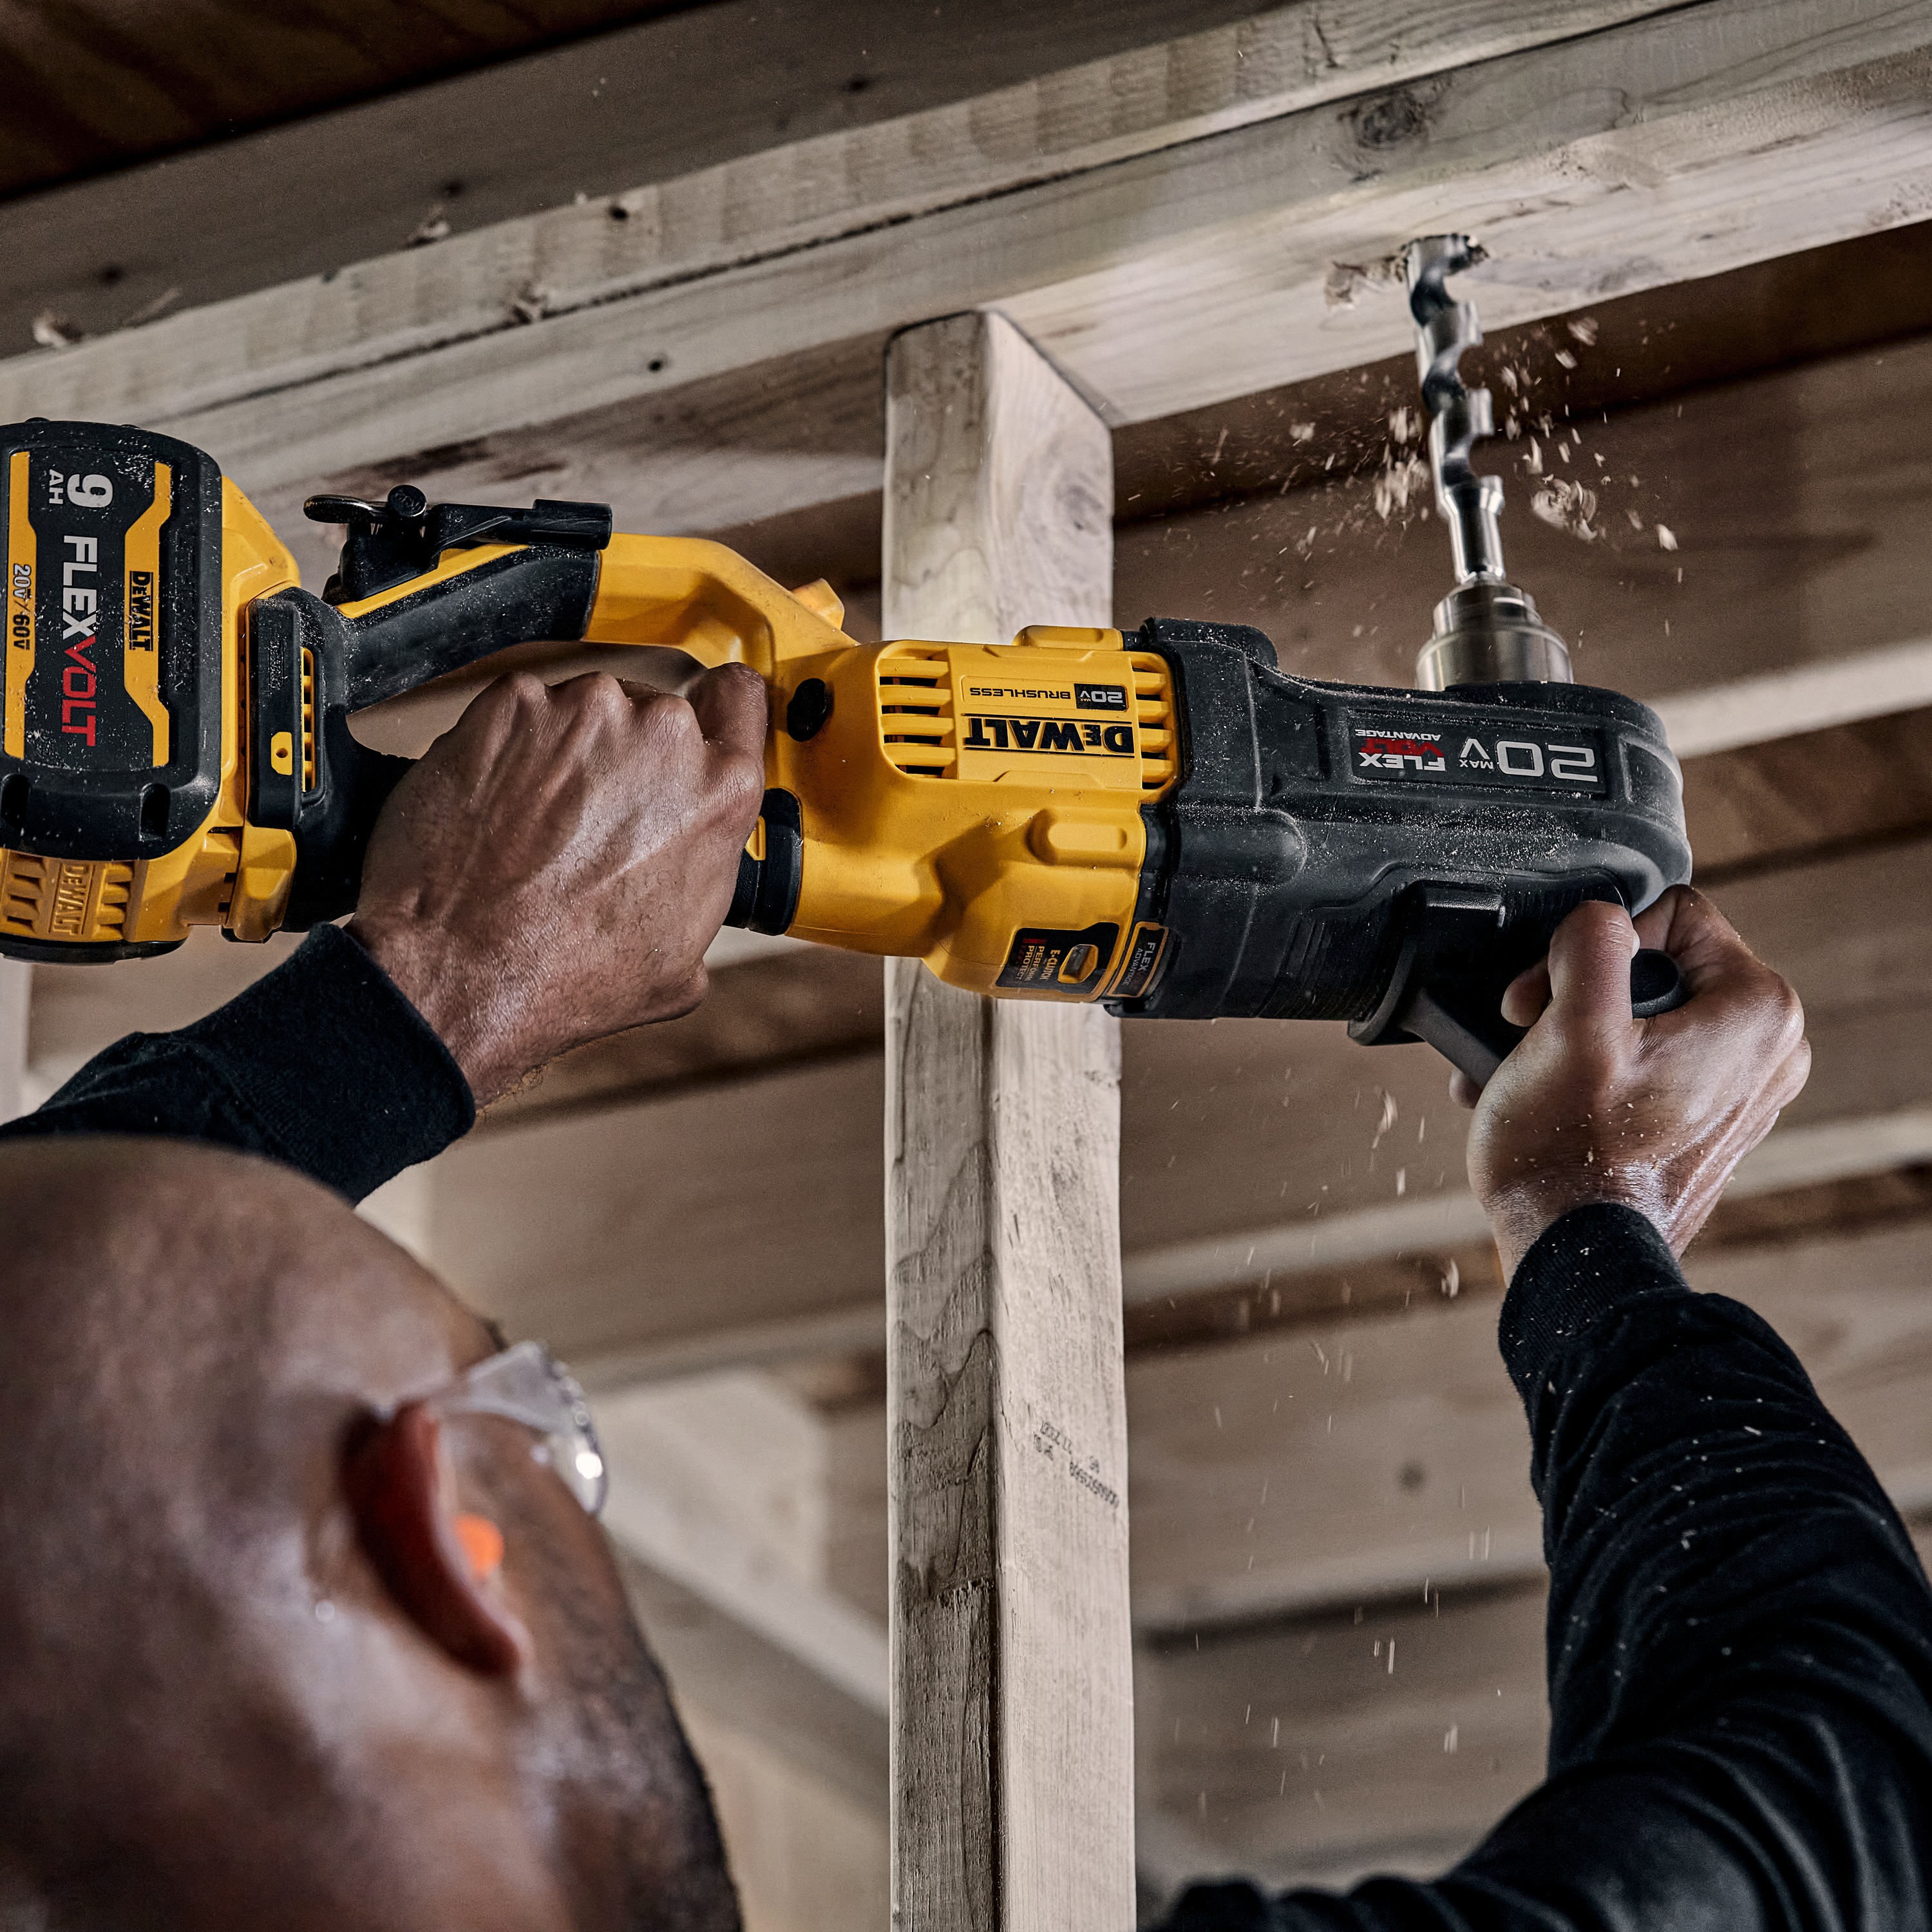 DEWALT - 20V MAX Brushless Cordless 12 in Compact Stud and Joist Drill with FLEXVOLT ADVANTAGE Tool Only - DCD444B